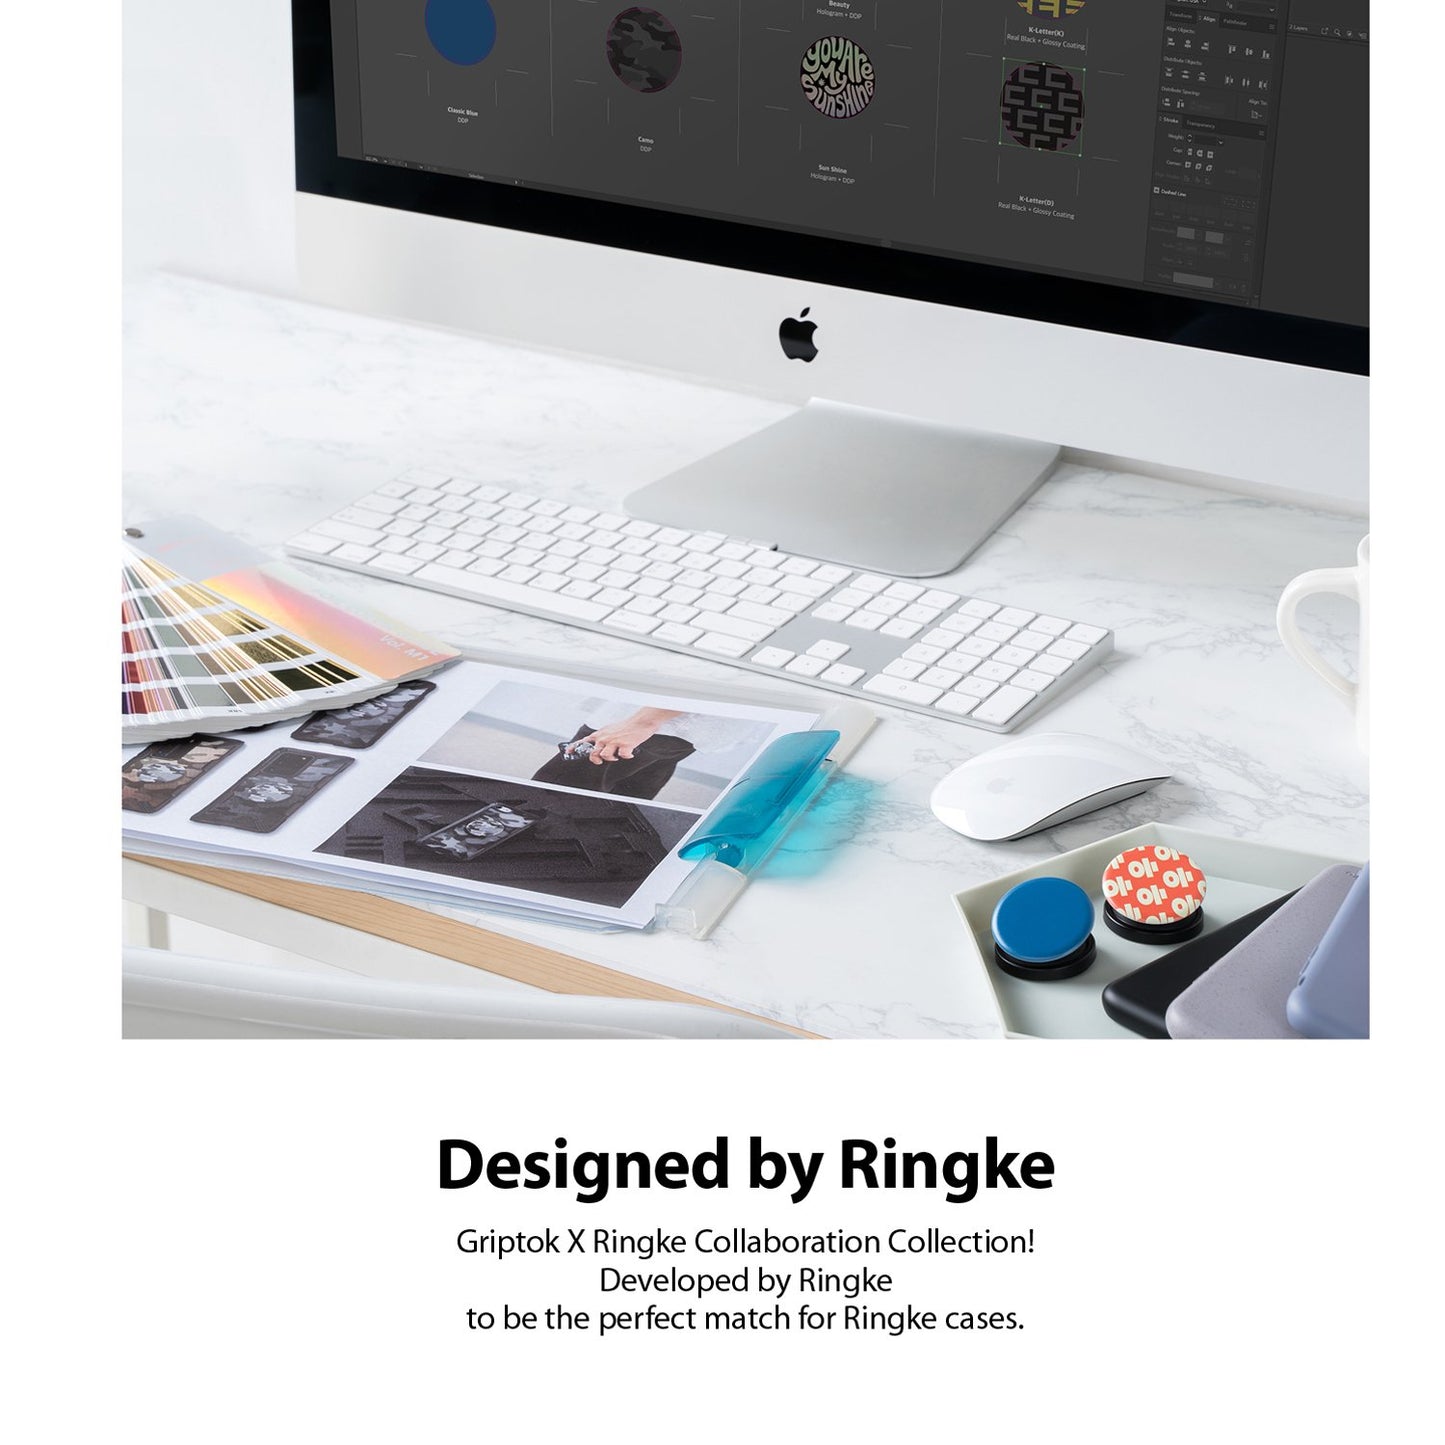 Ringke Griptok for Smart Devices